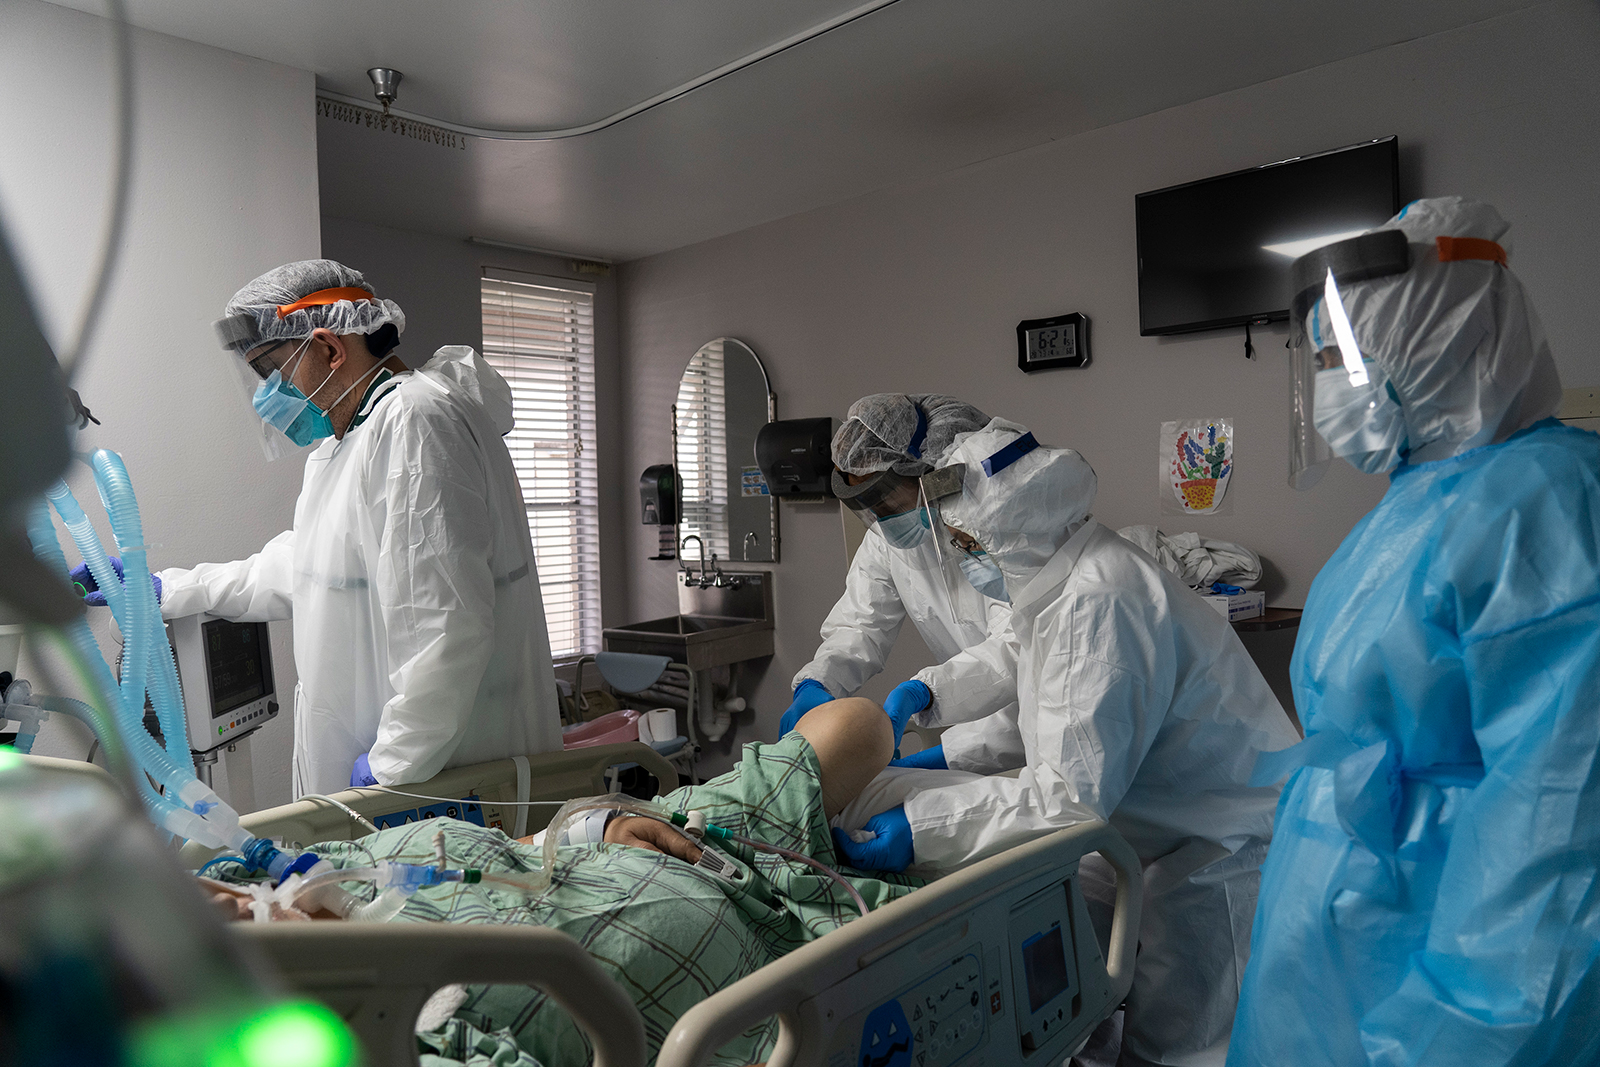 Members of the medical staff treat a patient in the Covid-19 intensive care unit at the United Memorial Medical Center in Houston, Texas, on July 28.